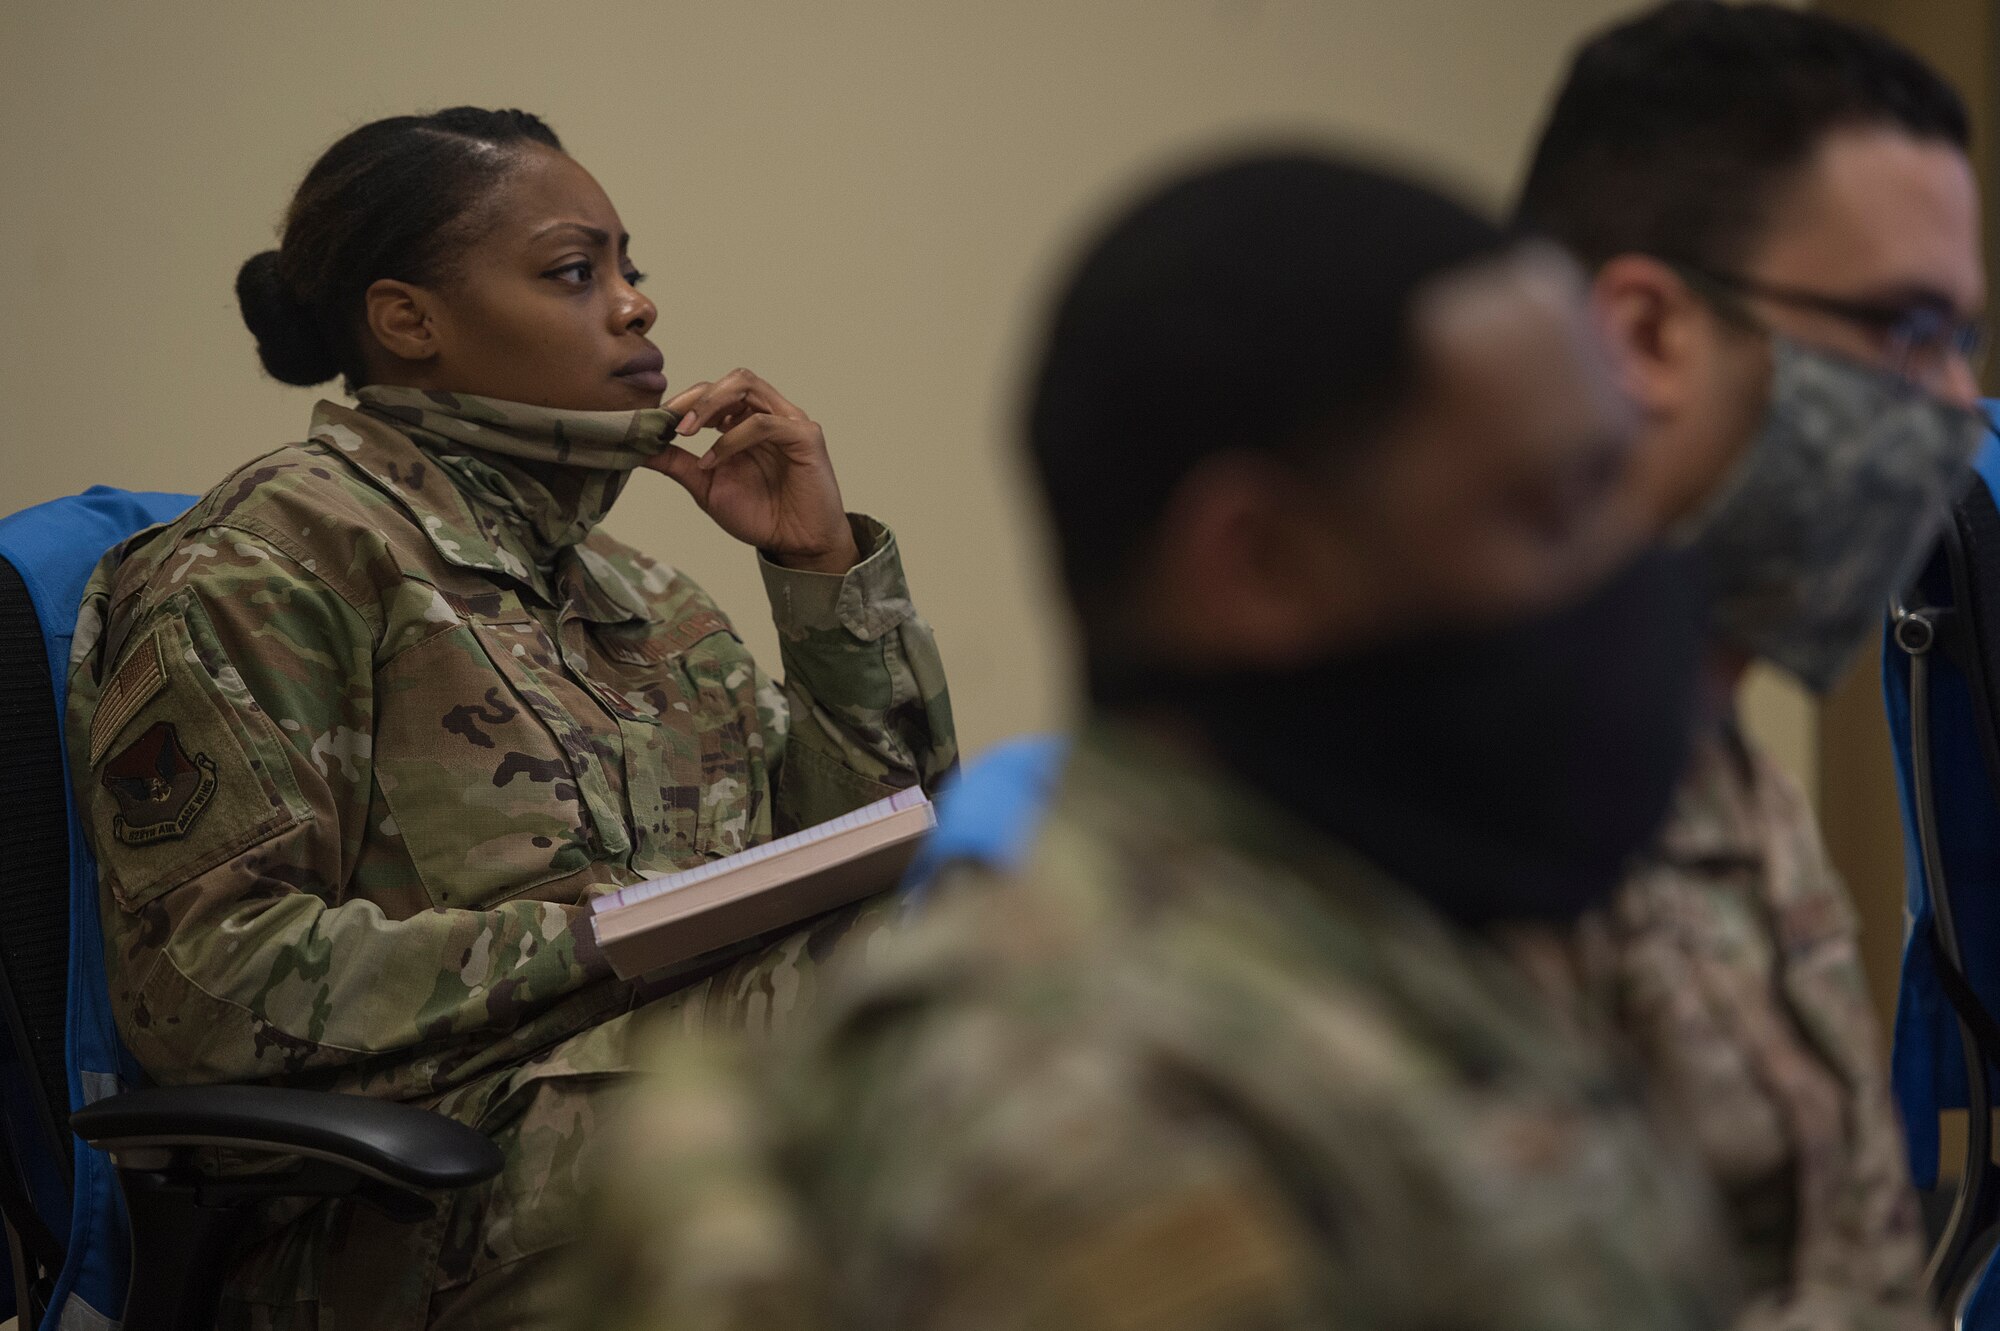 Capt. Felicia Logan, 628th Air Base Wing Office of the Staff Judge Advocate chief of operations law and COVID-19 Working Group member, takes notes during a meeting at the Emergency Operations Center located at Joint Base Charleston, S.C., April 16, 2020. Through the collaboration of ideas and perspectives, the group’s mission is to create possible solutions and generate recommendations for JB Charleston leaders. Their work allows commanders to make sound decisions affecting the installation and mission during the global pandemic.